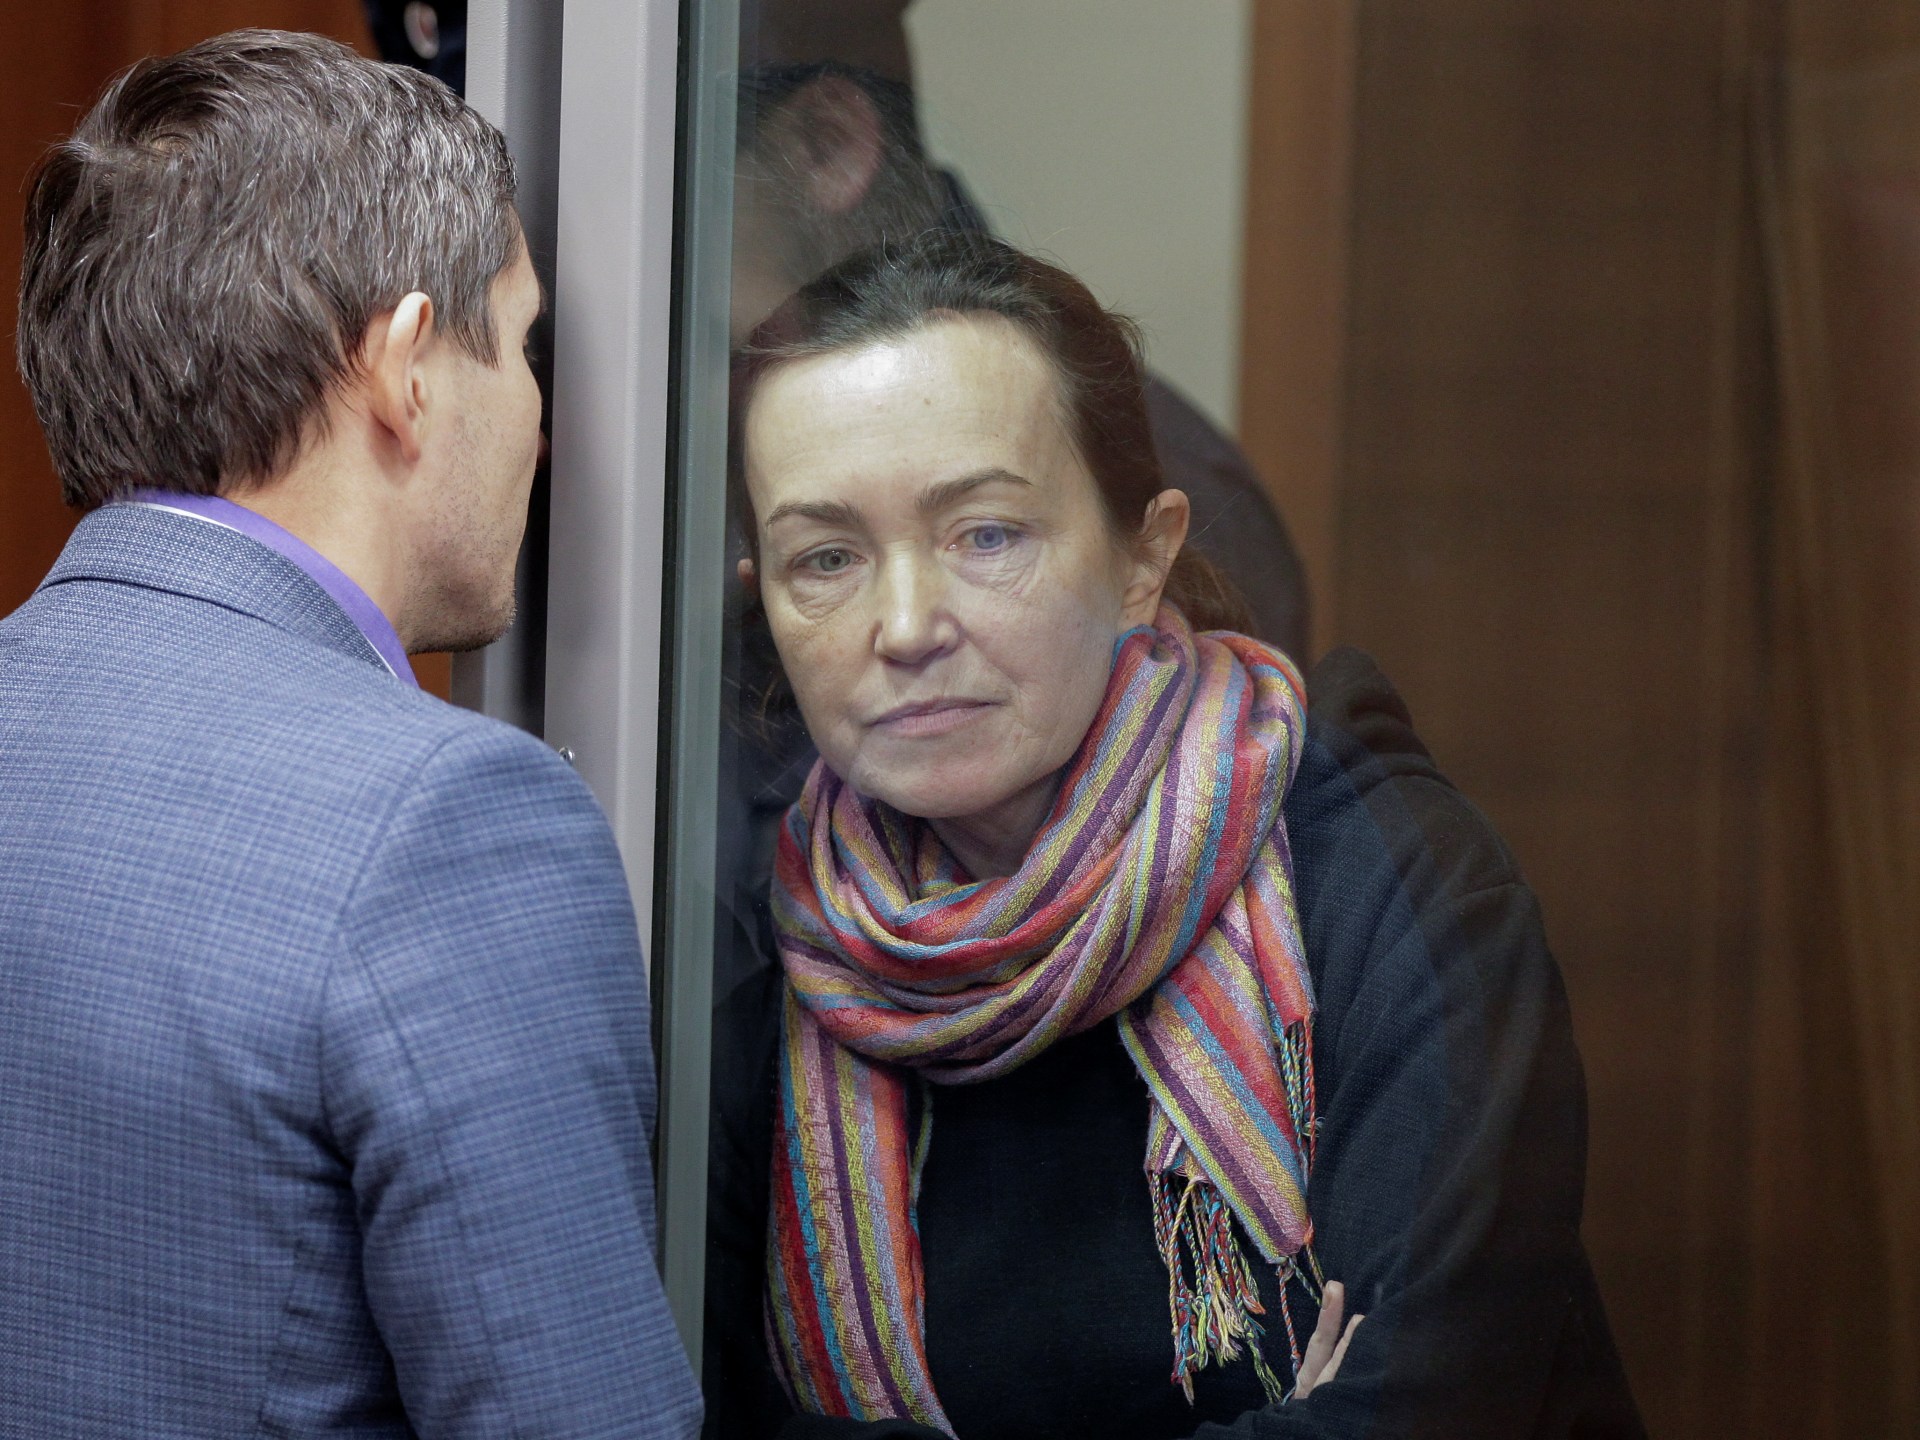 Russian court extends detention of US journalist Kurmasheva until February | Freedom of the Press News